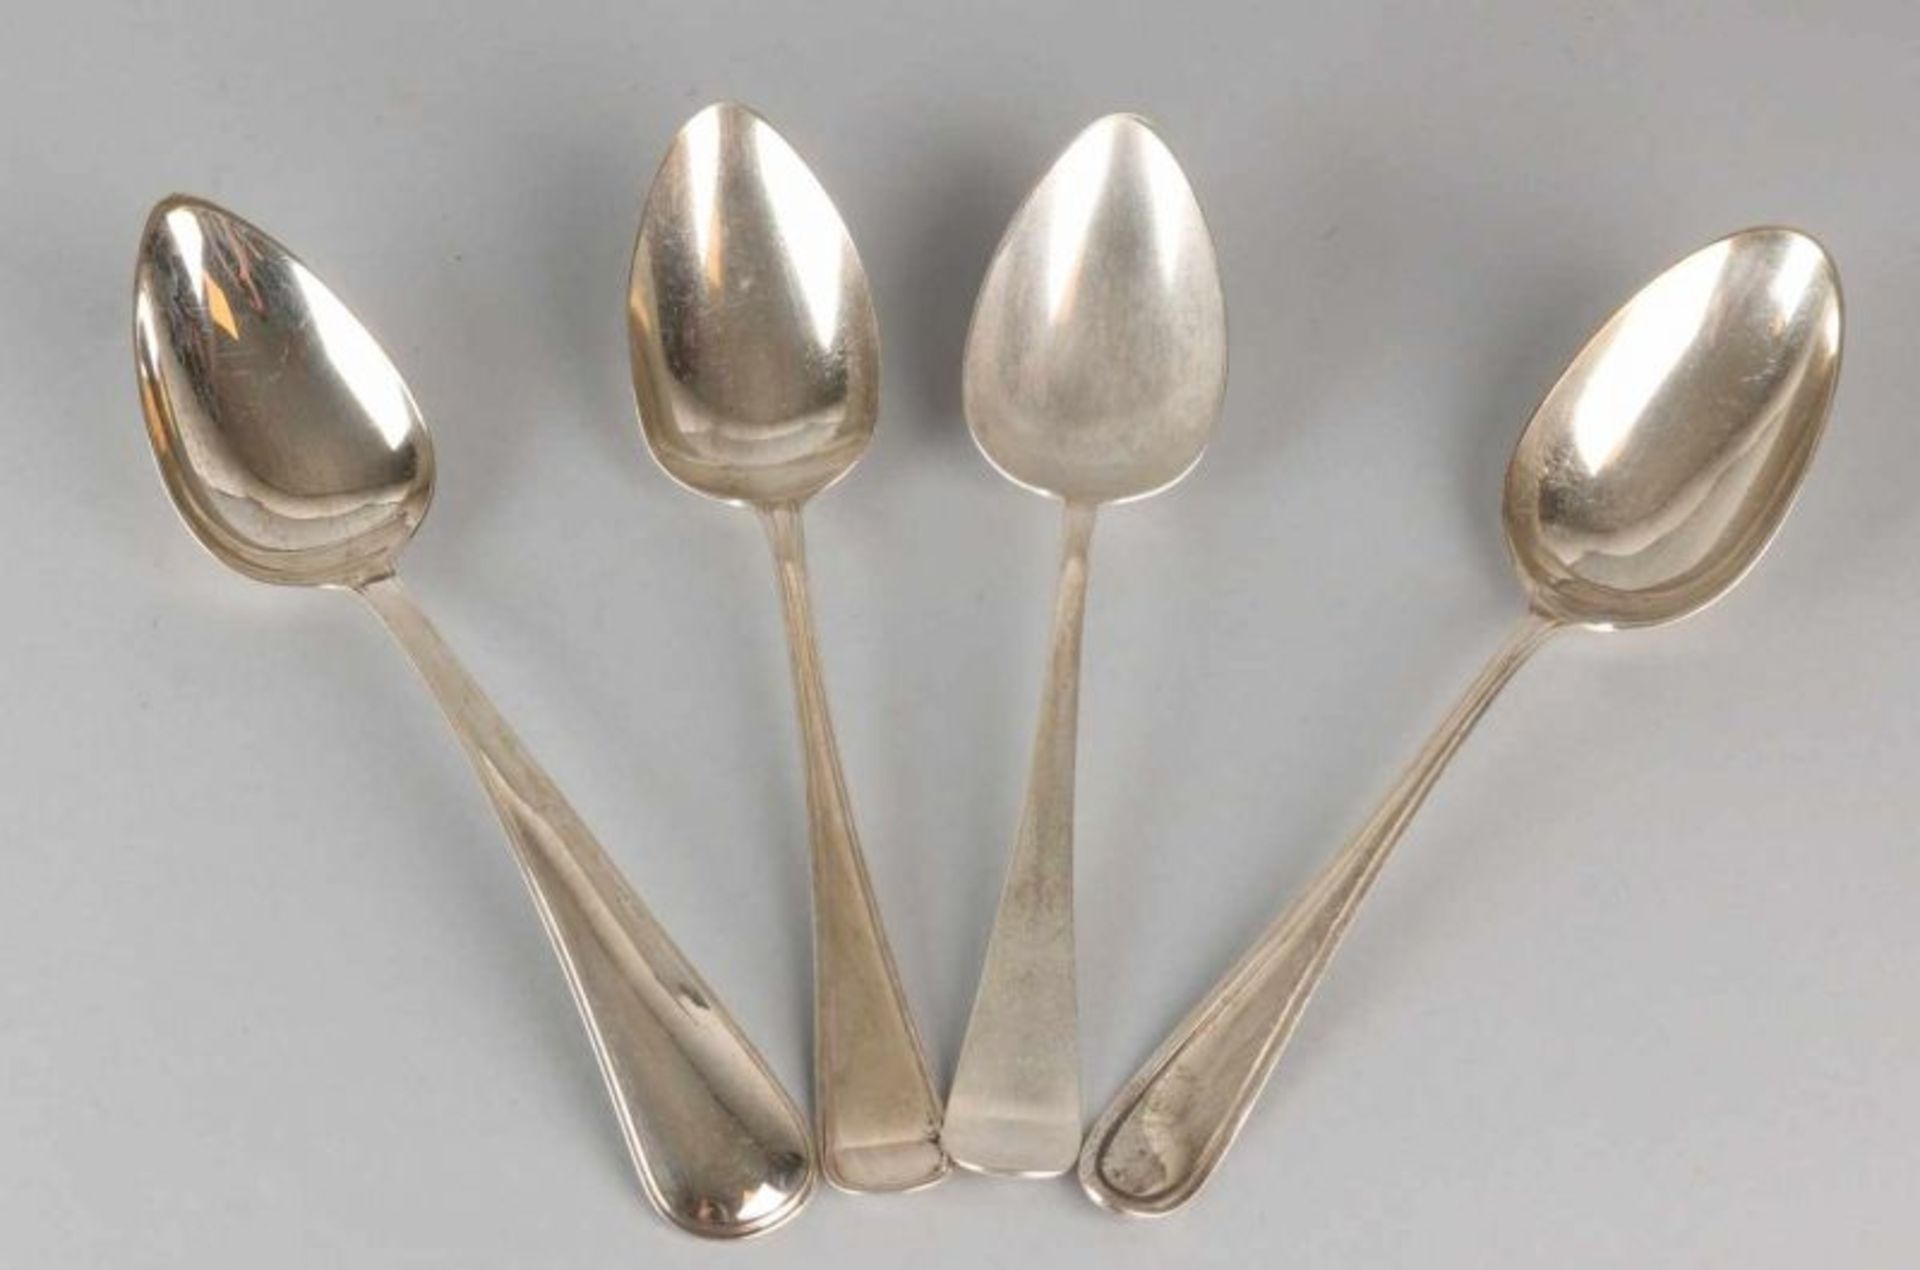 Lot four silver serving spoons, 835/000, various models include princes and a lofje. MT .: J.M.van